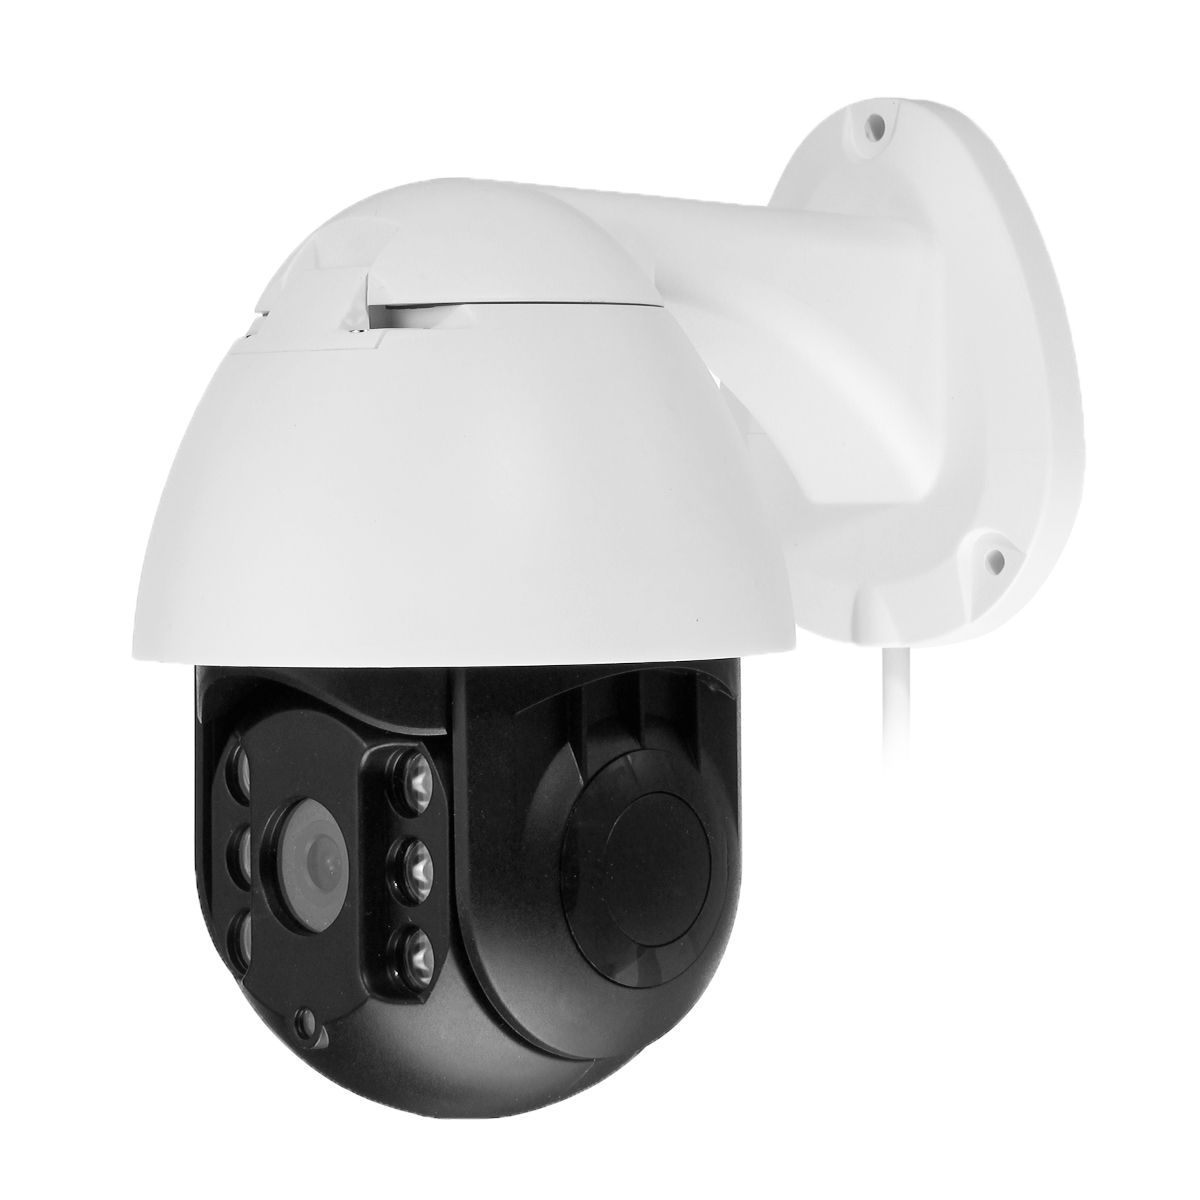 1080P-20MP-WiFi-Wireless-PTZ-Security-IP-Camera-Outdoor-Waterproof-Monitor-Night-Vision-1558555